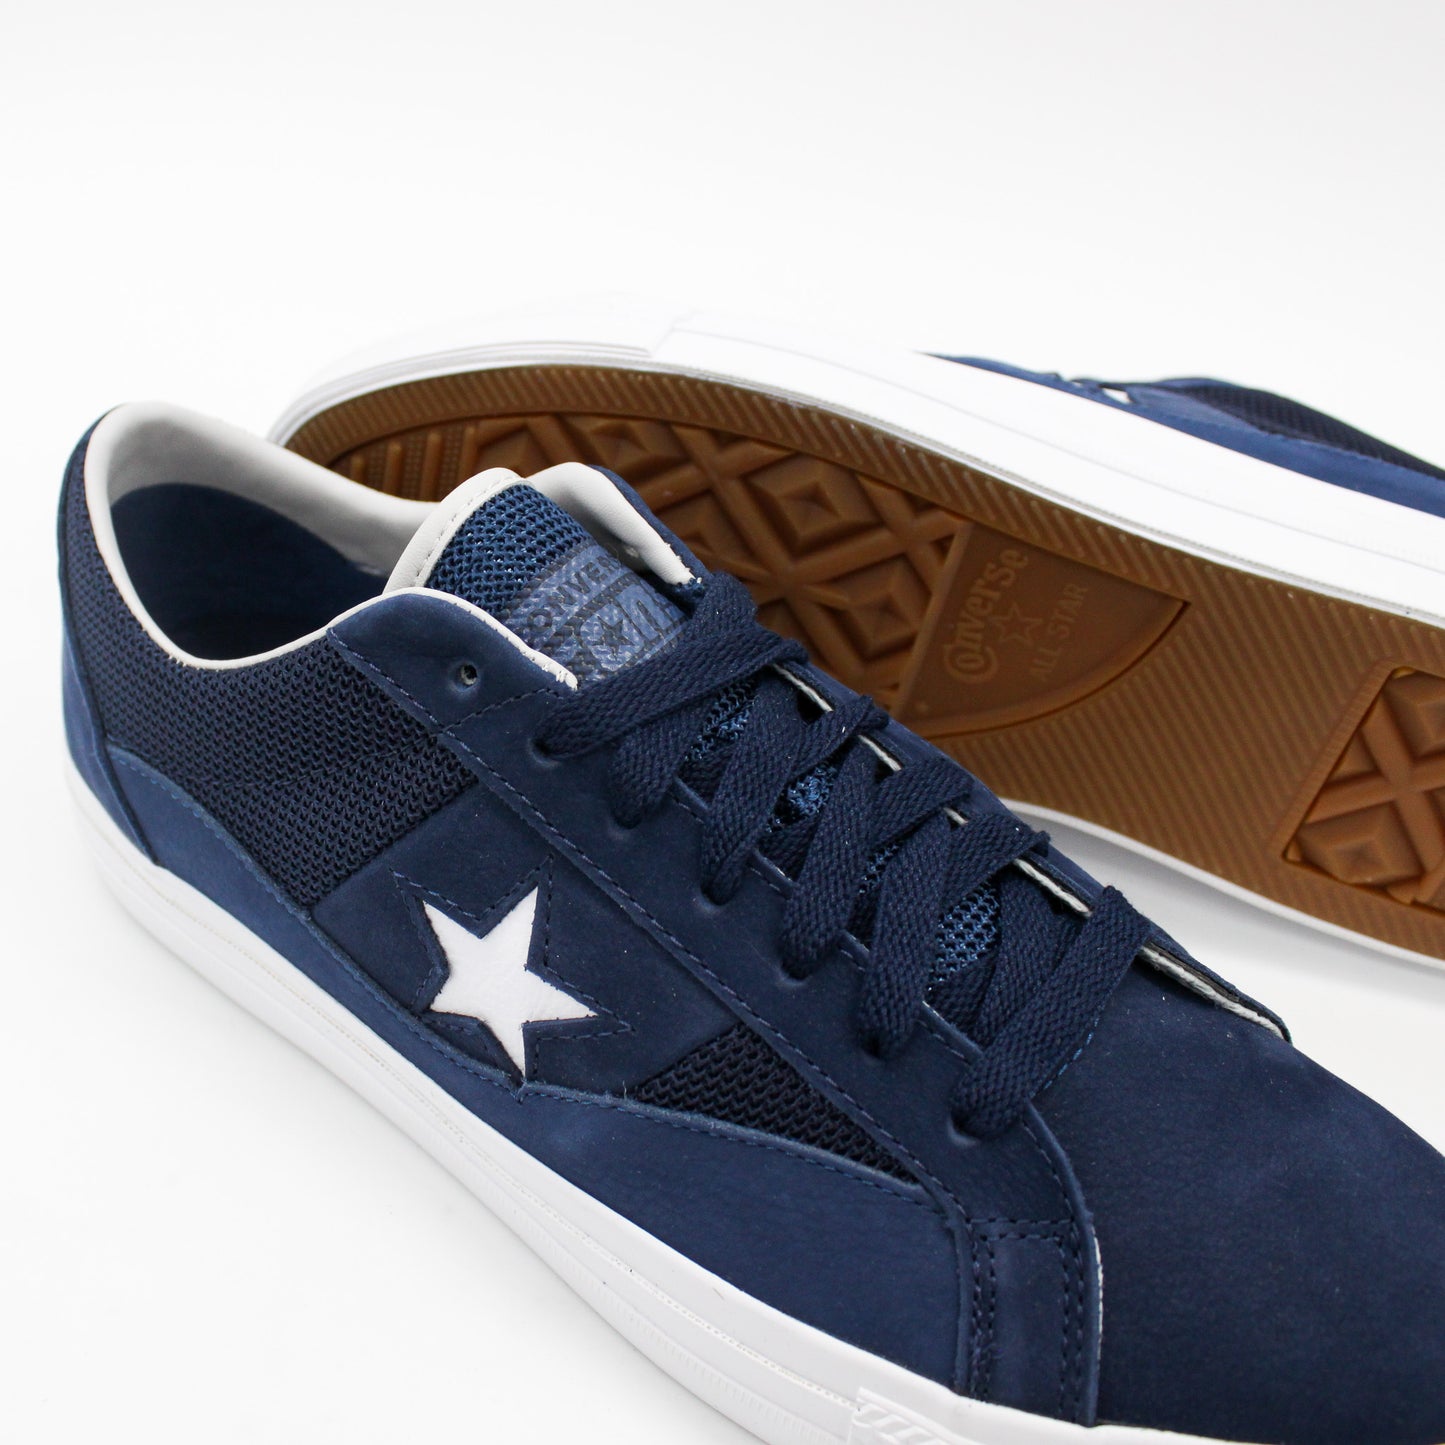 Converse x Alltimers One Star Pro- Navy/White